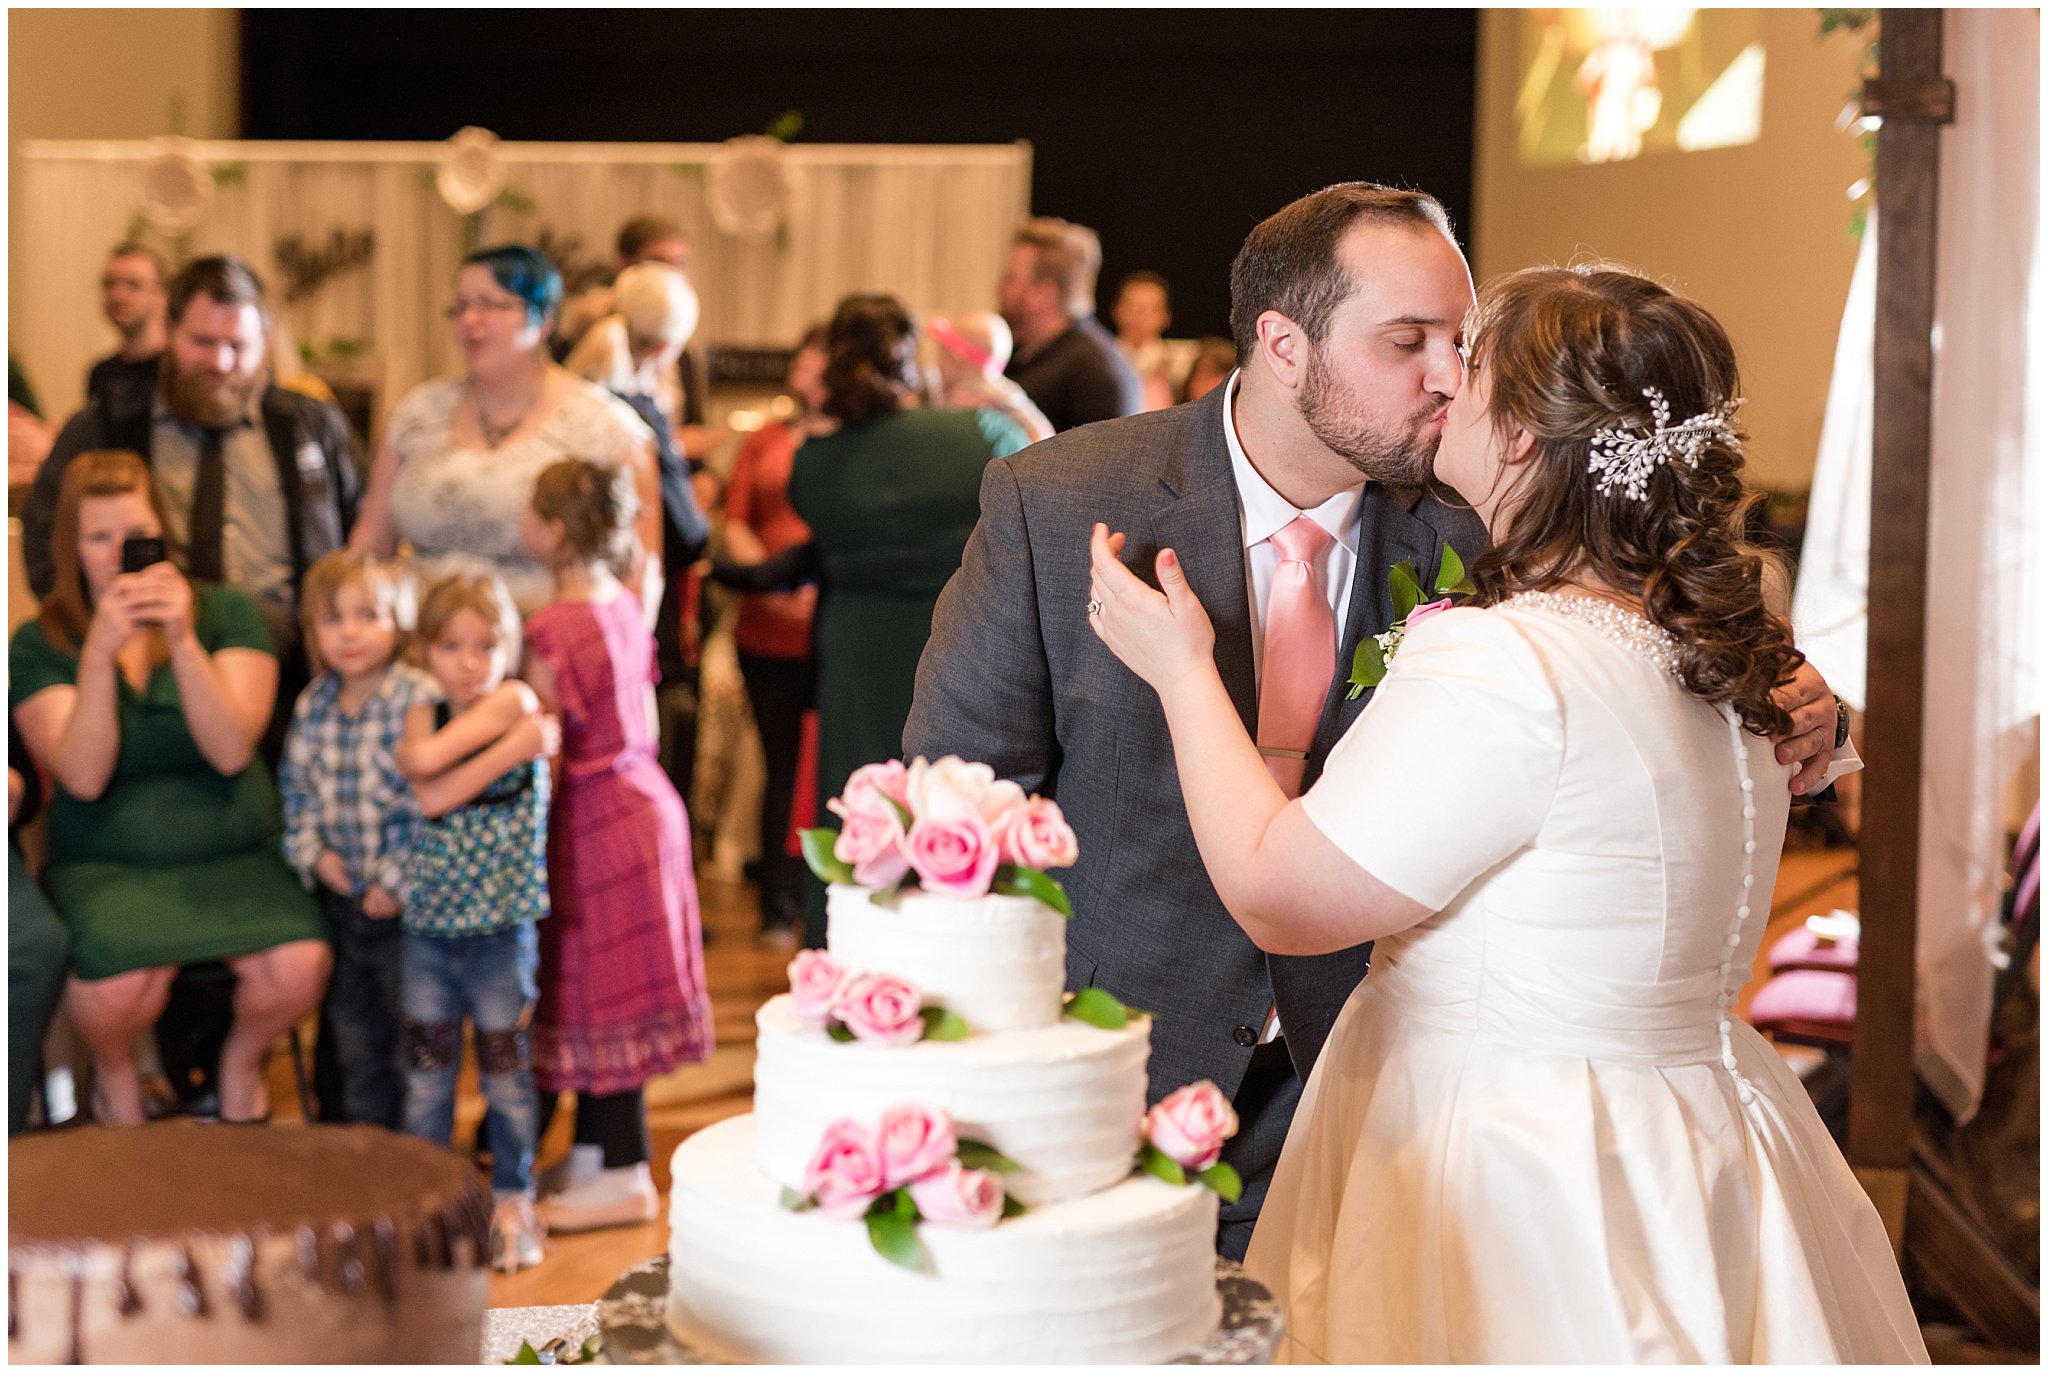 Cake cutting with friends and family | Ogden Temple Wedding | Jessie and Dallin Photography